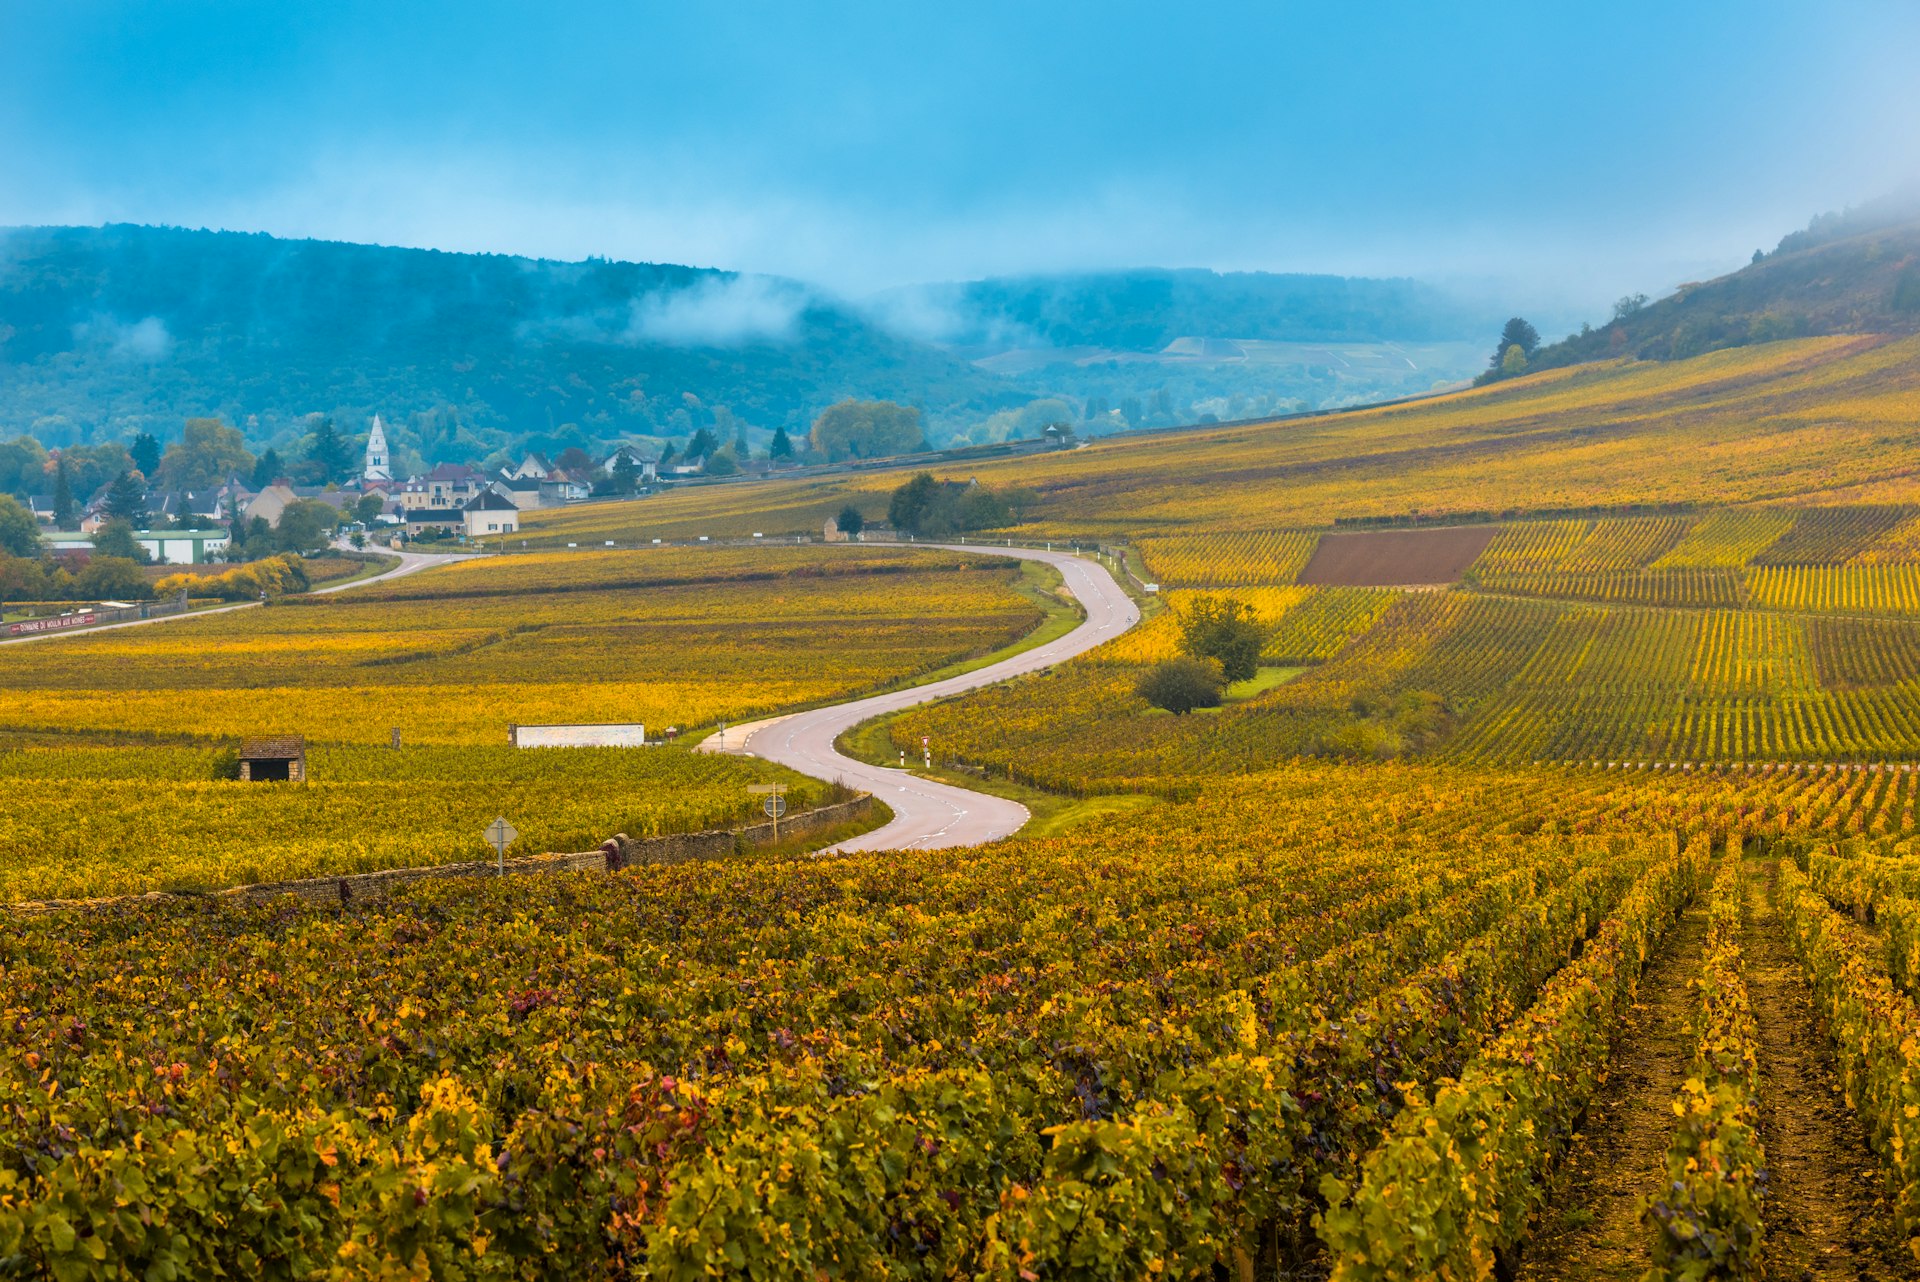 A wide shot of vineyards in the autumn season with golden leaves on the vines and mist on the hills in the distance, Burgundy, France